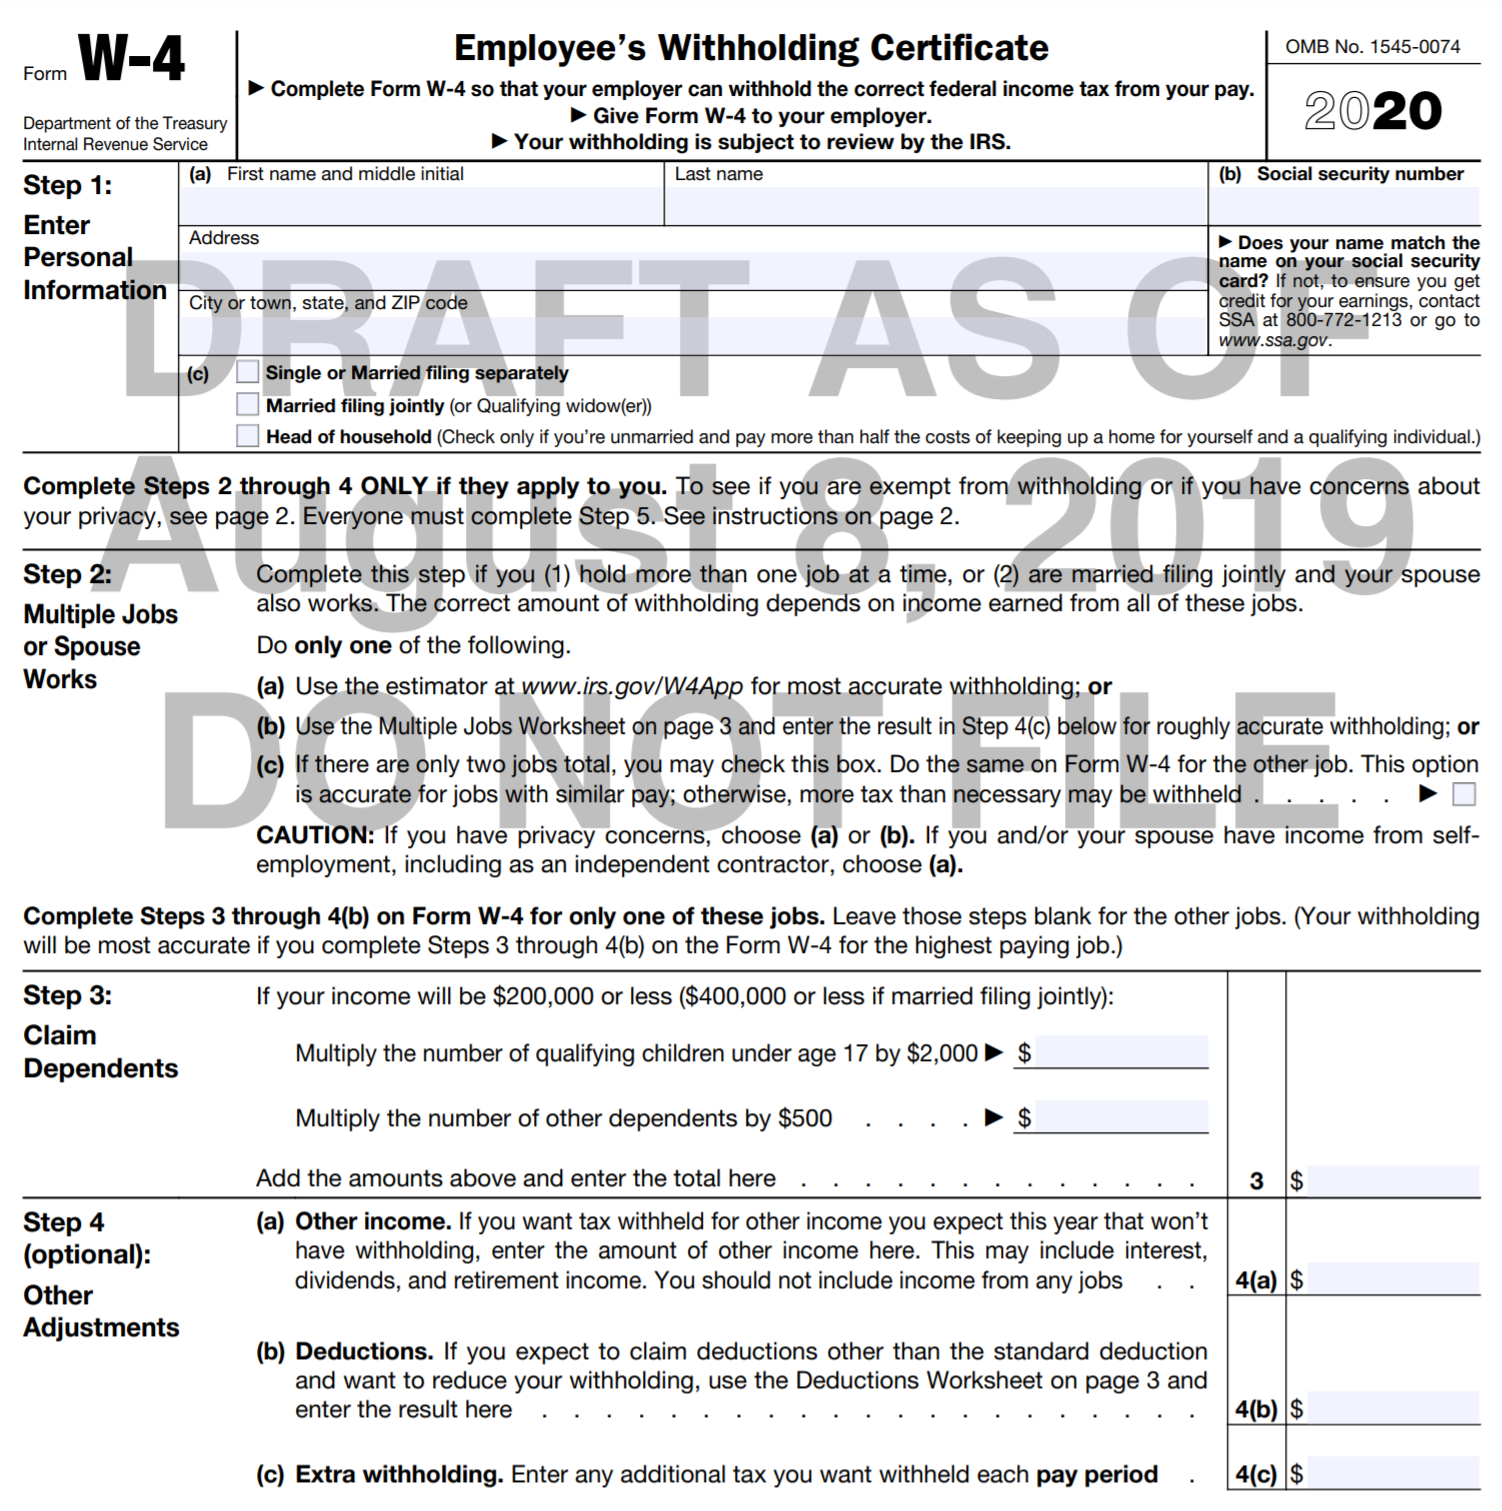 Are You Ready Big Changes To The 2020 Federal W 4 Withholding Form PS WebSolution